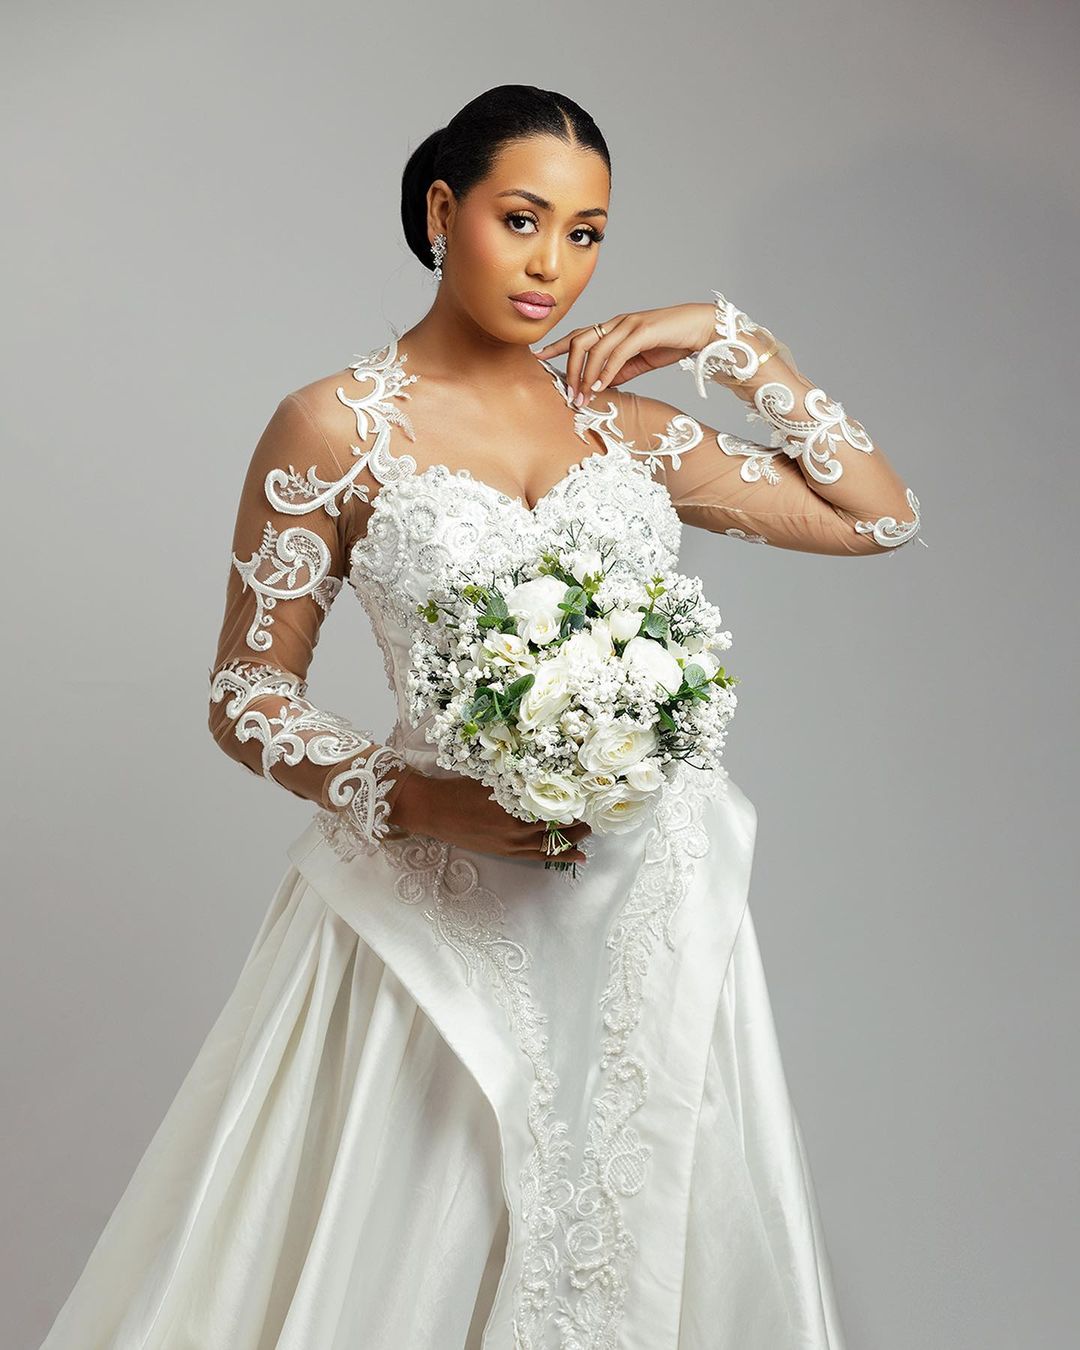 Bring That Ravishing Glow To Your White Wedding With This Beauty Look!